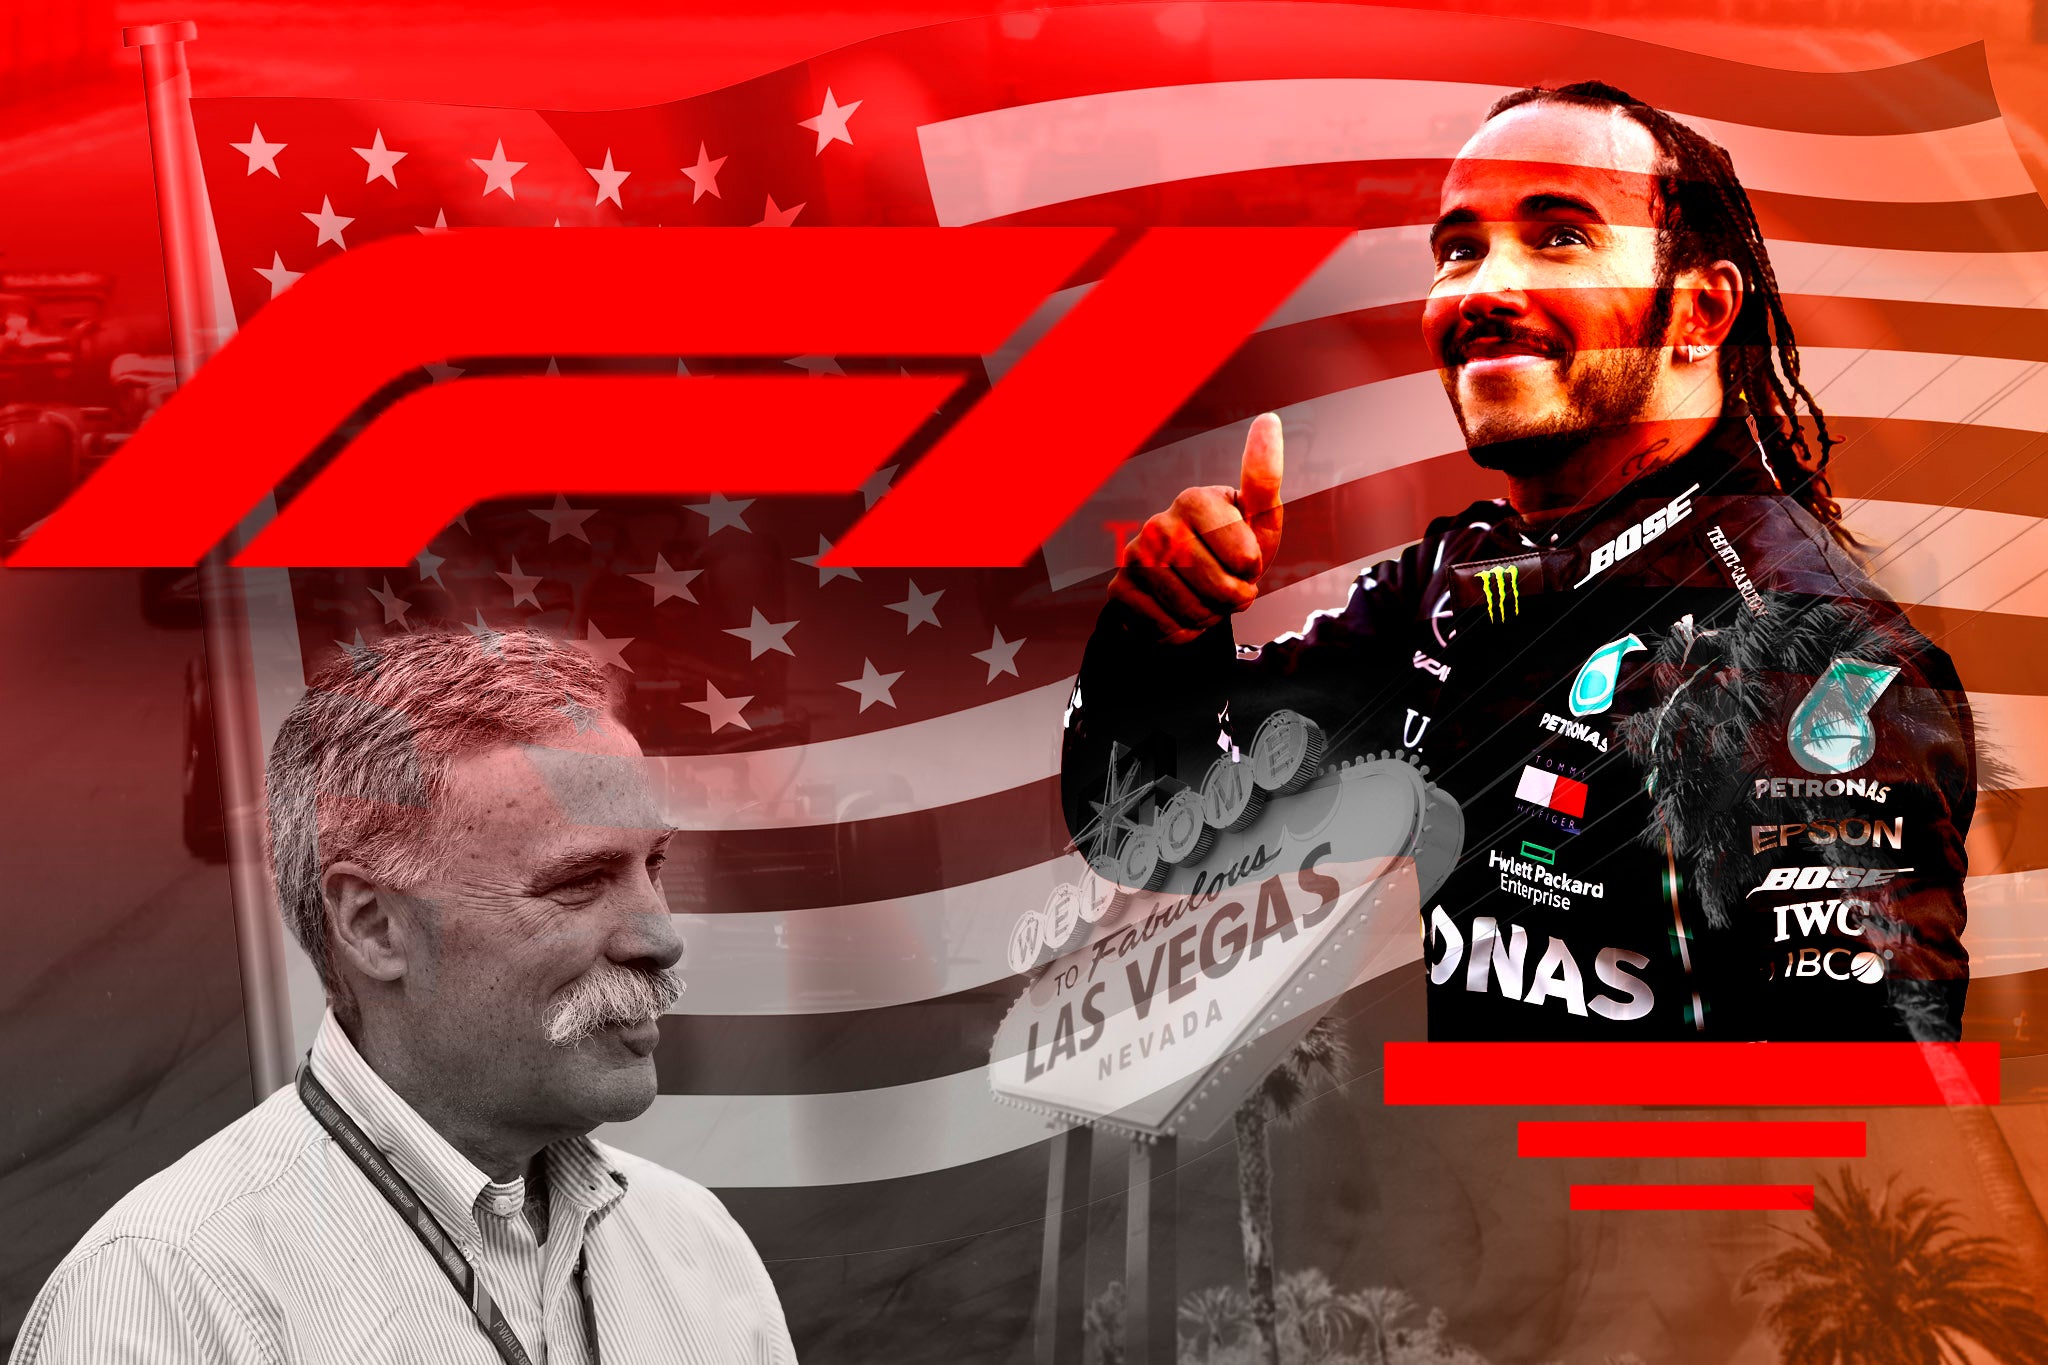 Formula 1 now has three races and record interest in the United States –but how have they done it?